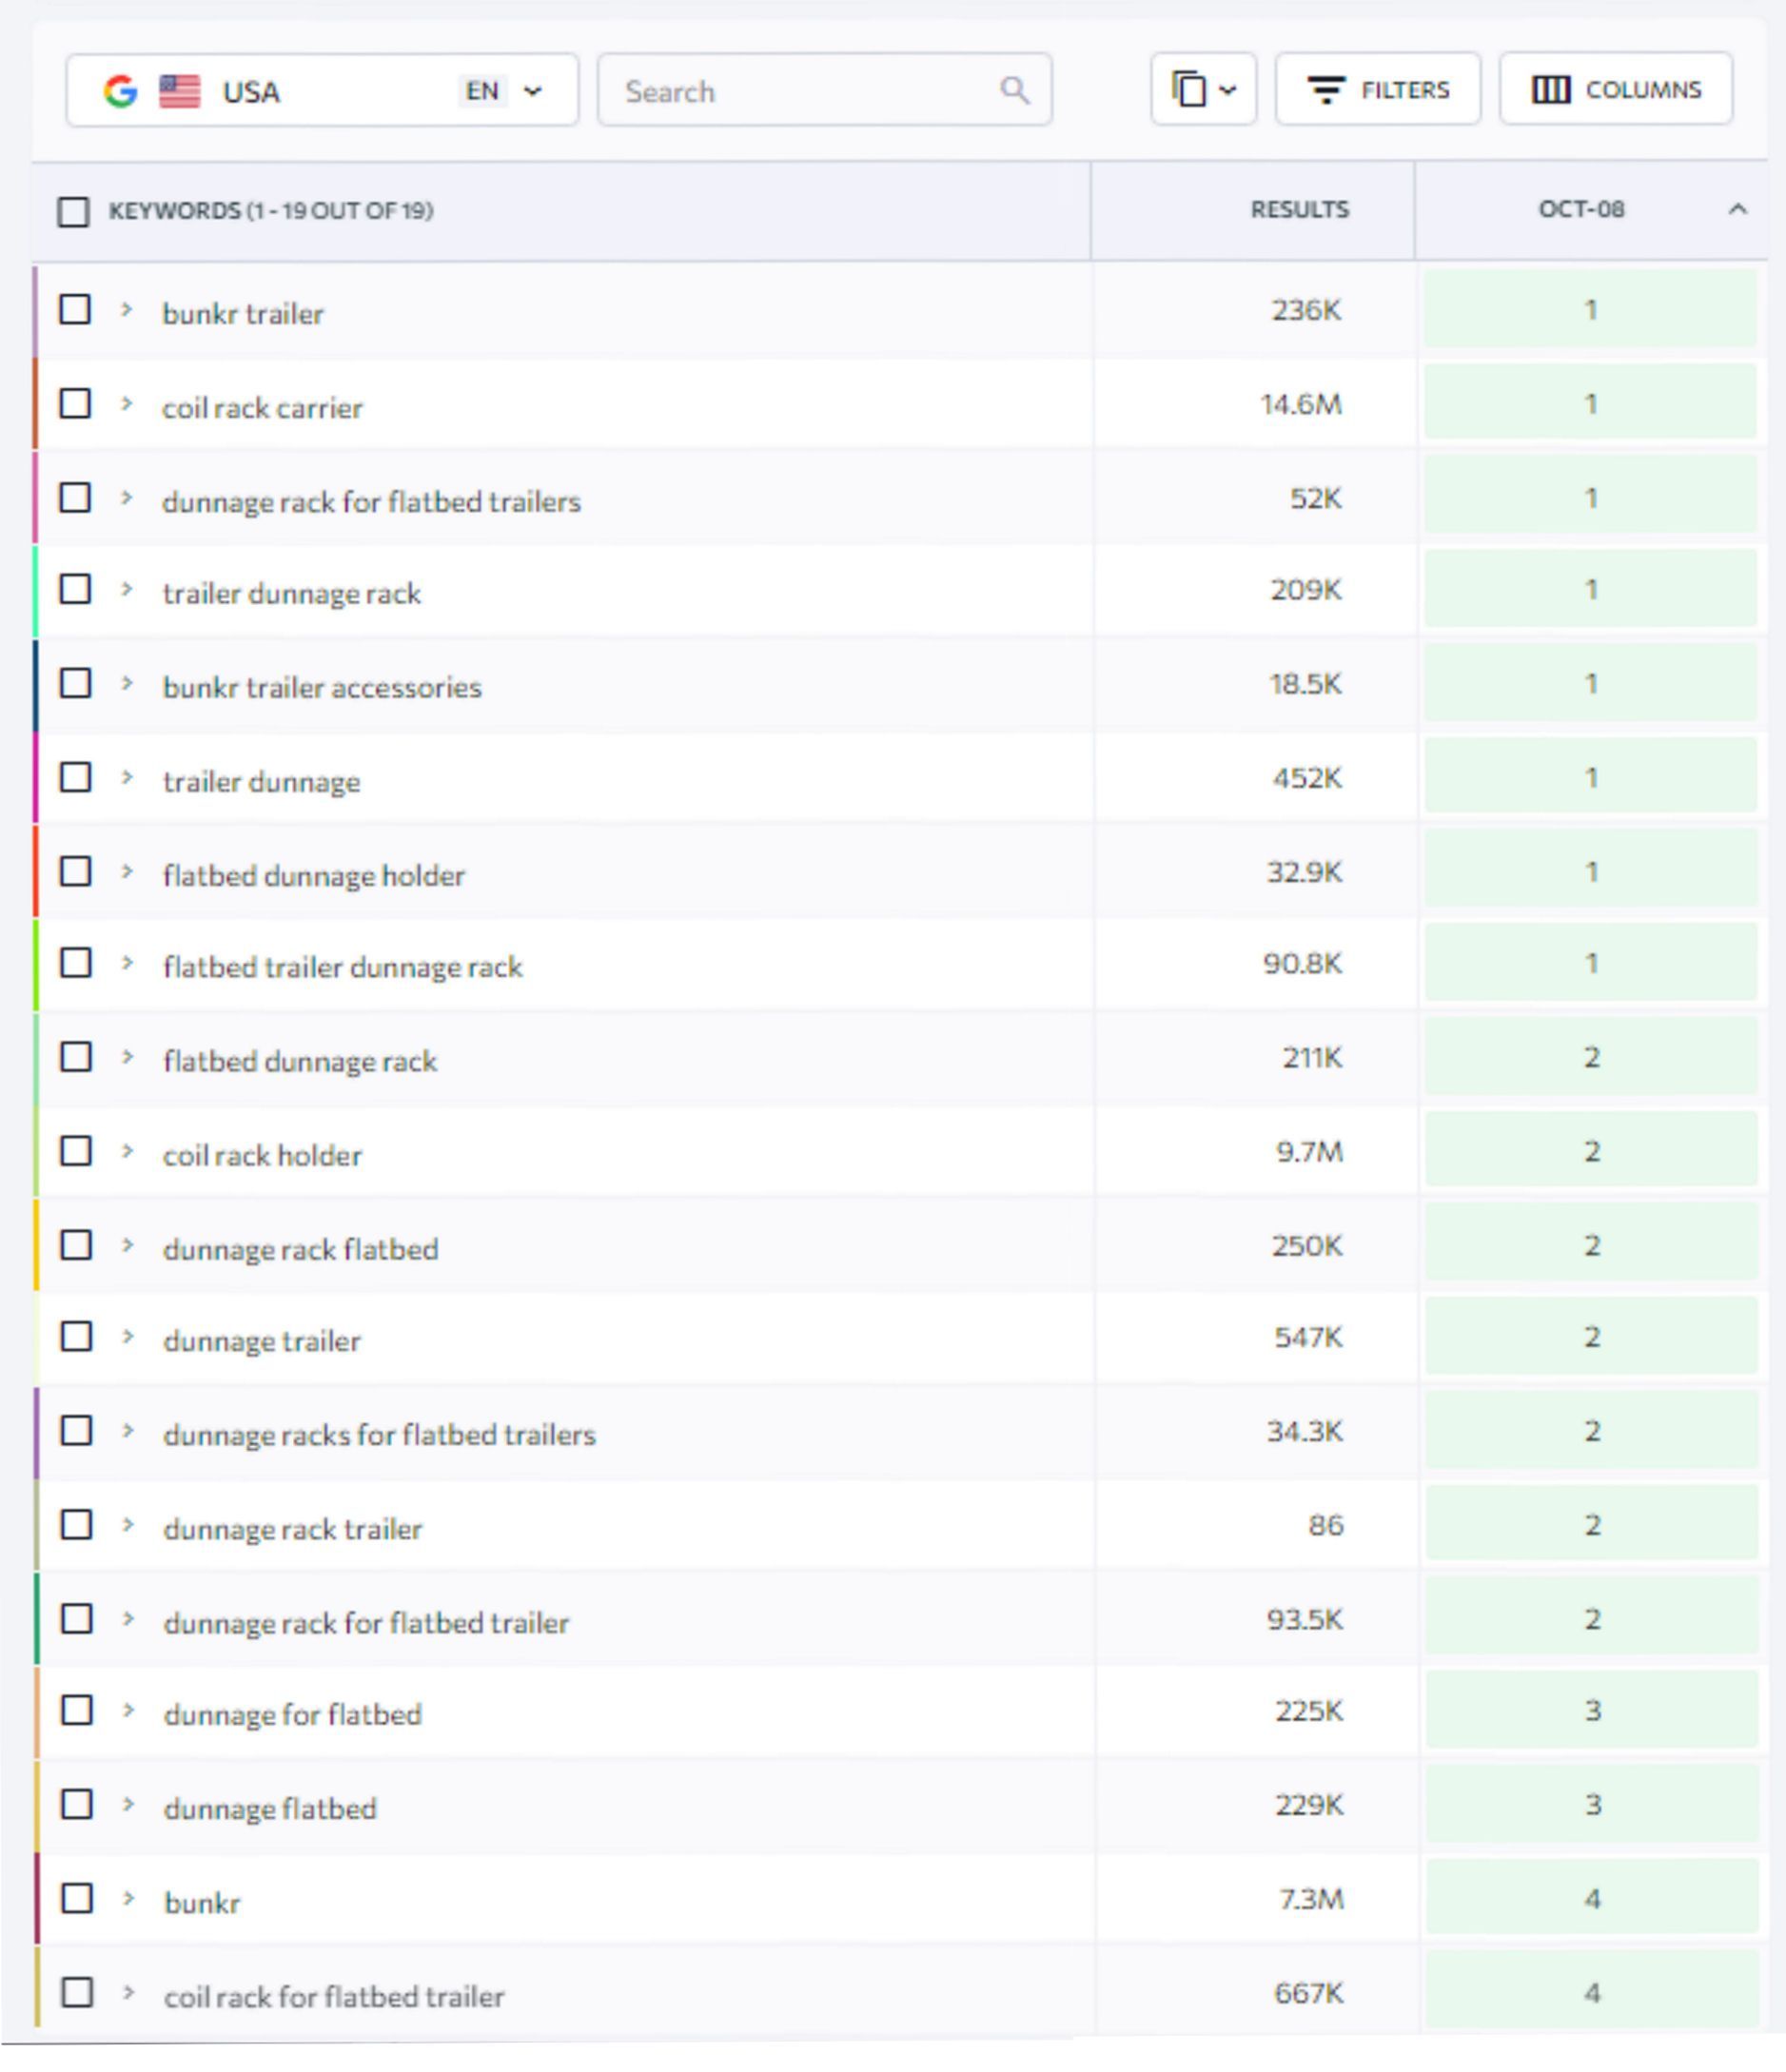 Search rankings tables showing 19 keywords in top 4 positions in search results